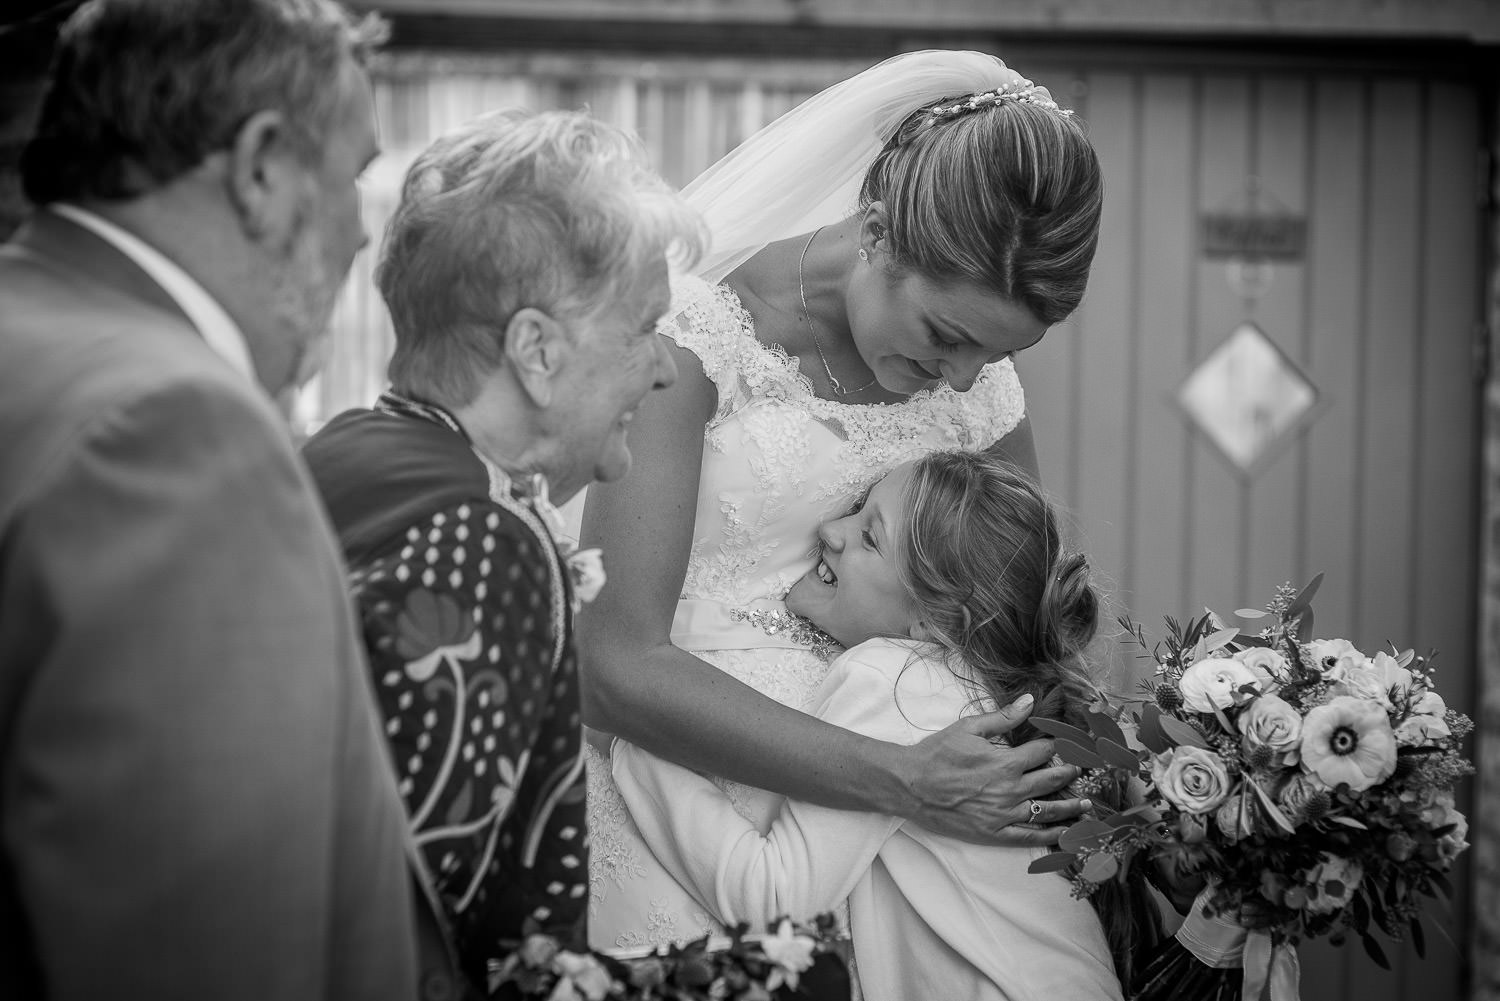 bride hugging a little girl at the wedding reception